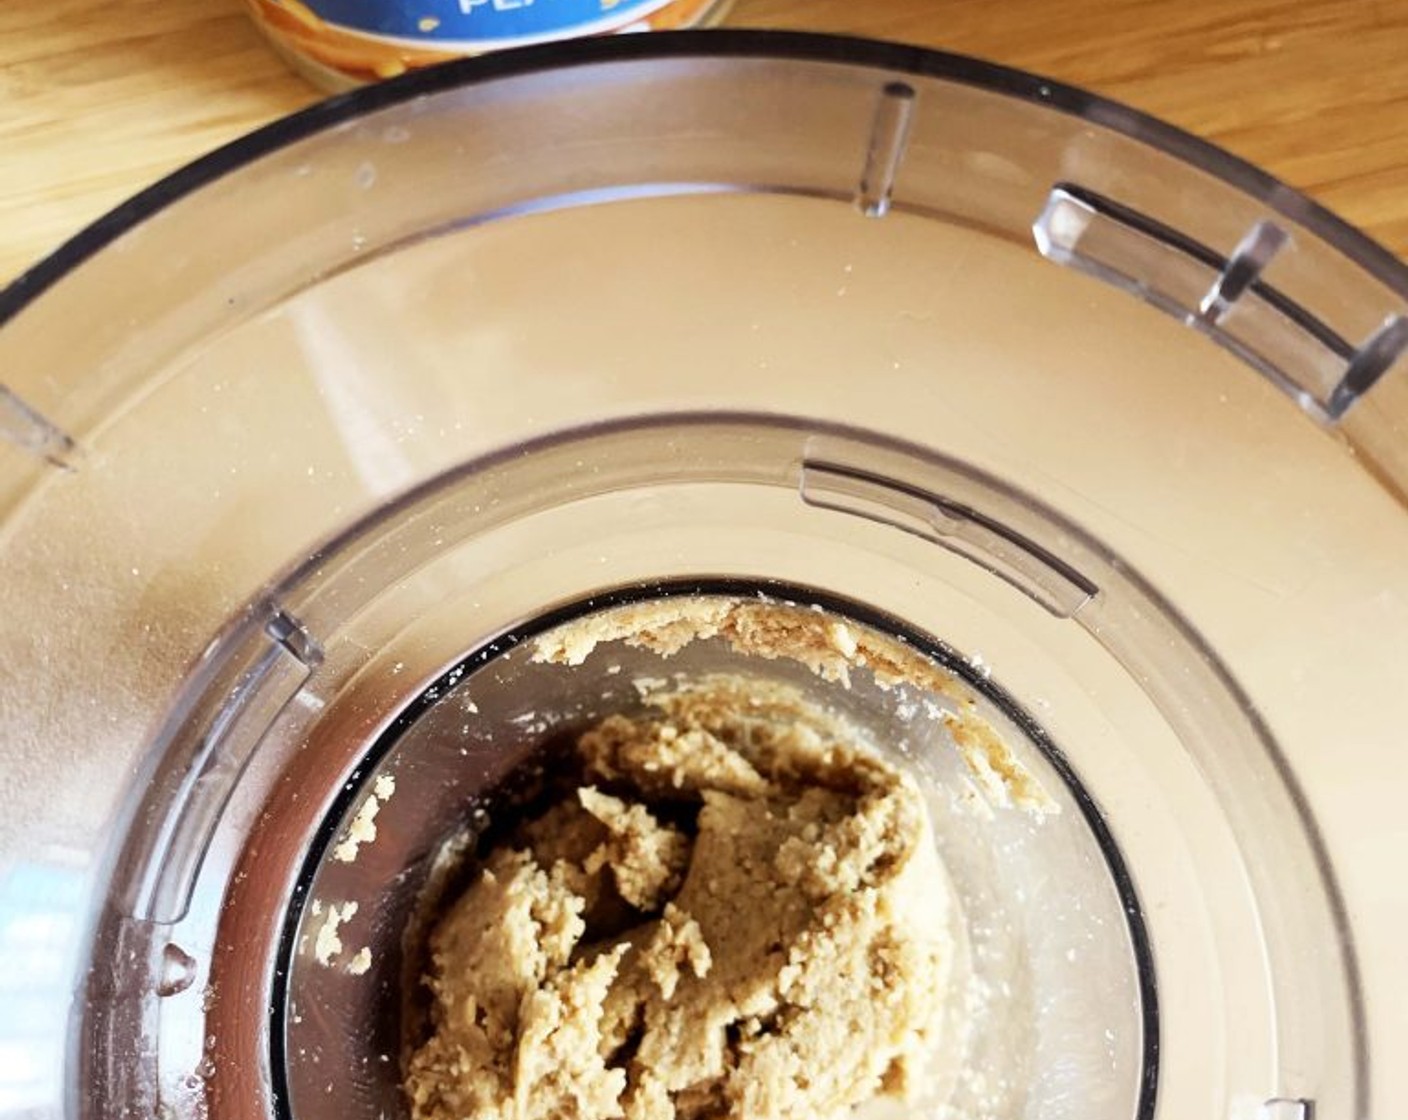 step 1 In a blender pulse together the Old Fashioned Rolled Oats (1/2 cup), Creamy Peanut Butter (1 1/2 Tbsp), Granulated Erythritol (1 Tbsp), and Coconut Oil (1 Tbsp) to make the base.